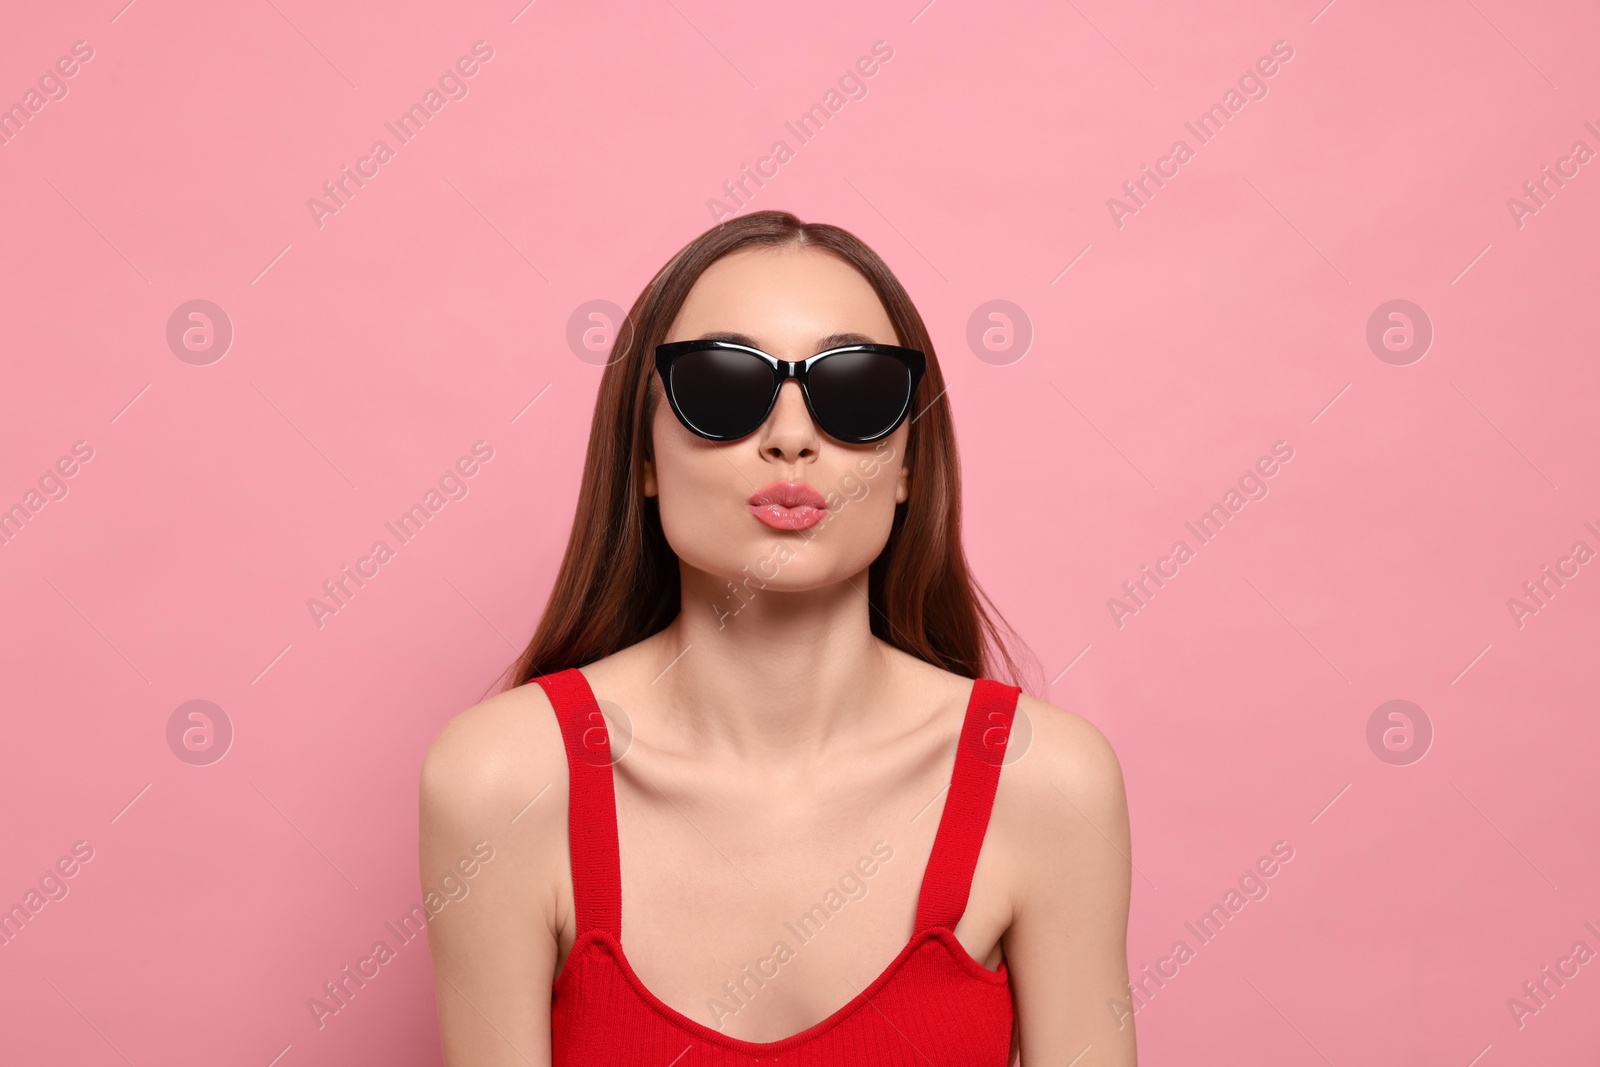 Photo of Beautiful young woman with sunglasses blowing kiss on pink background